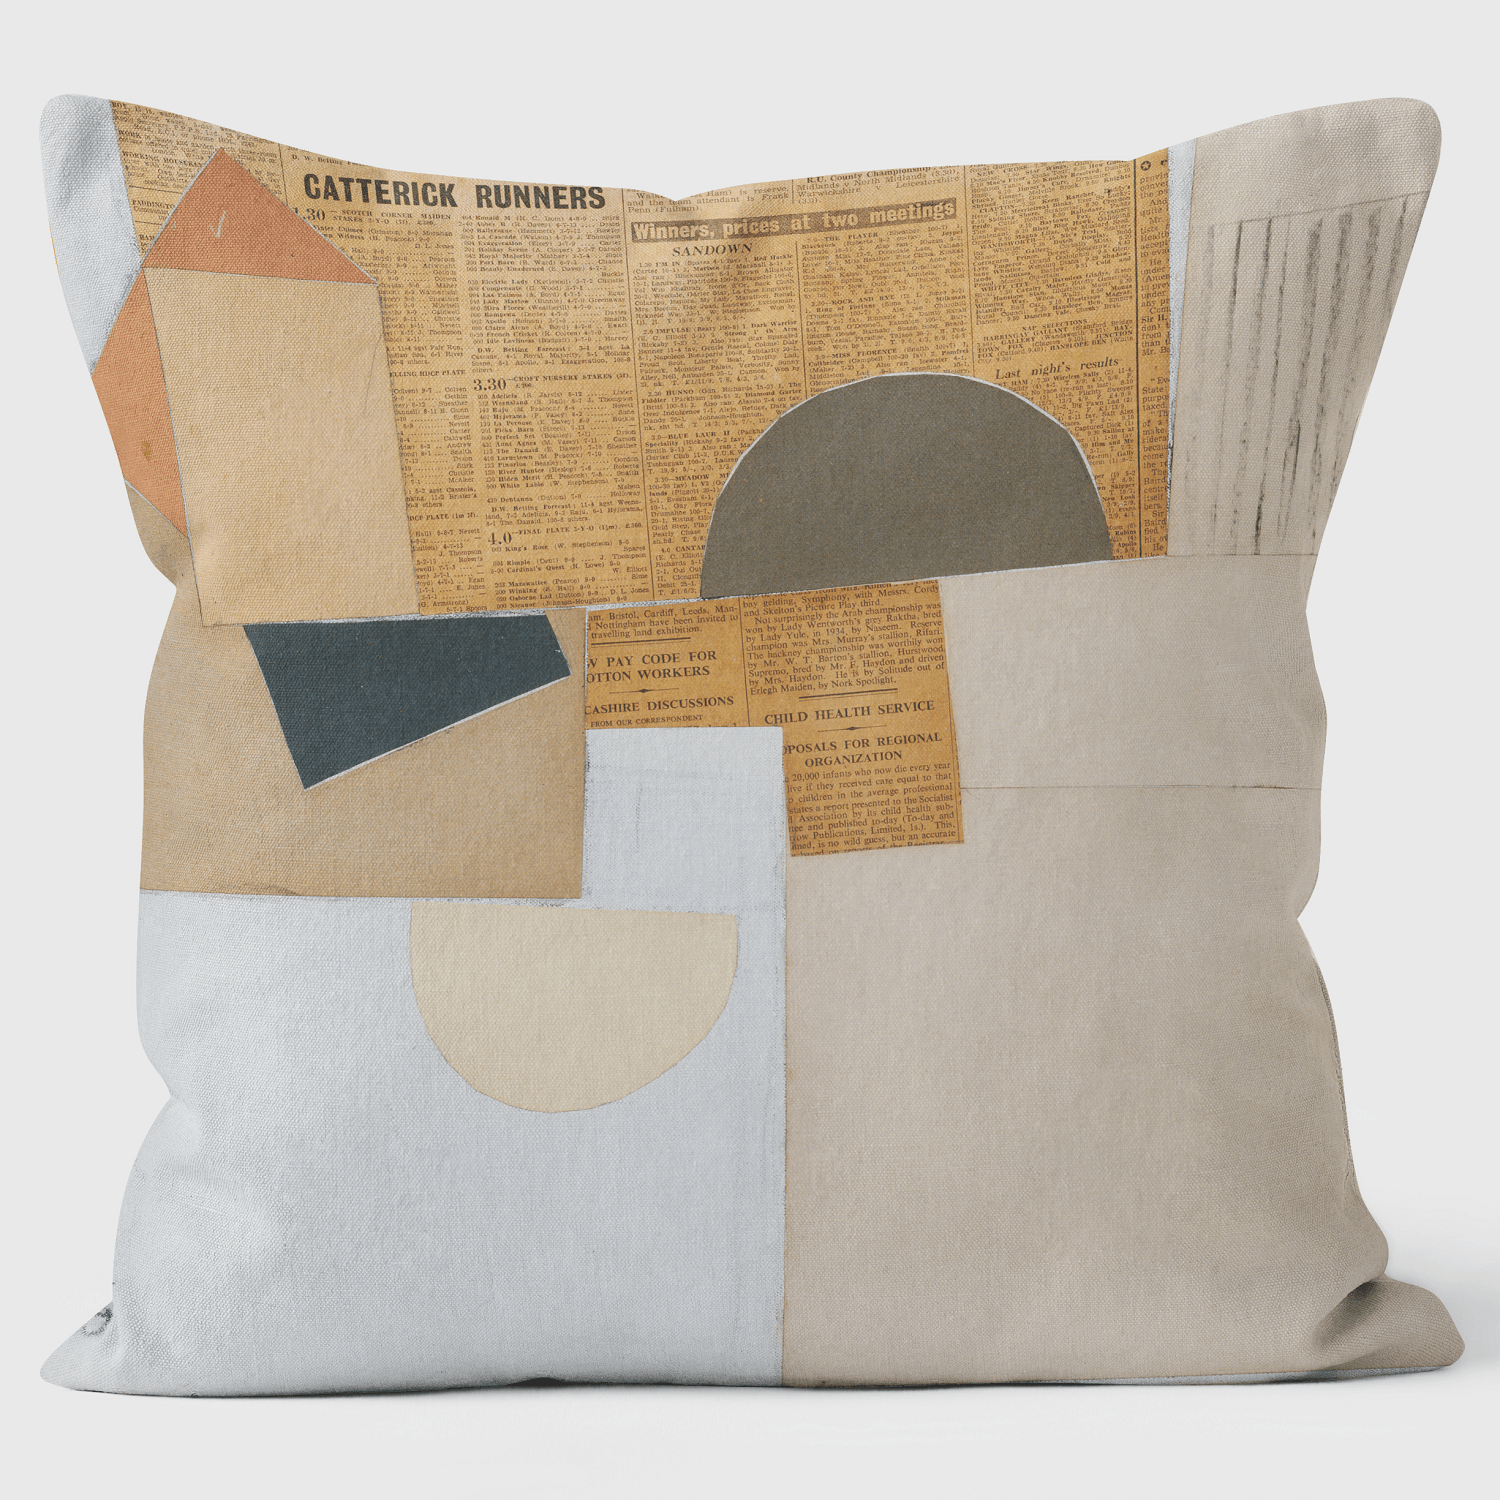 Abstract in White Grey Ochre -TATE - Victor Pasmore Cushion - Handmade Cushions UK - WeLoveCushions